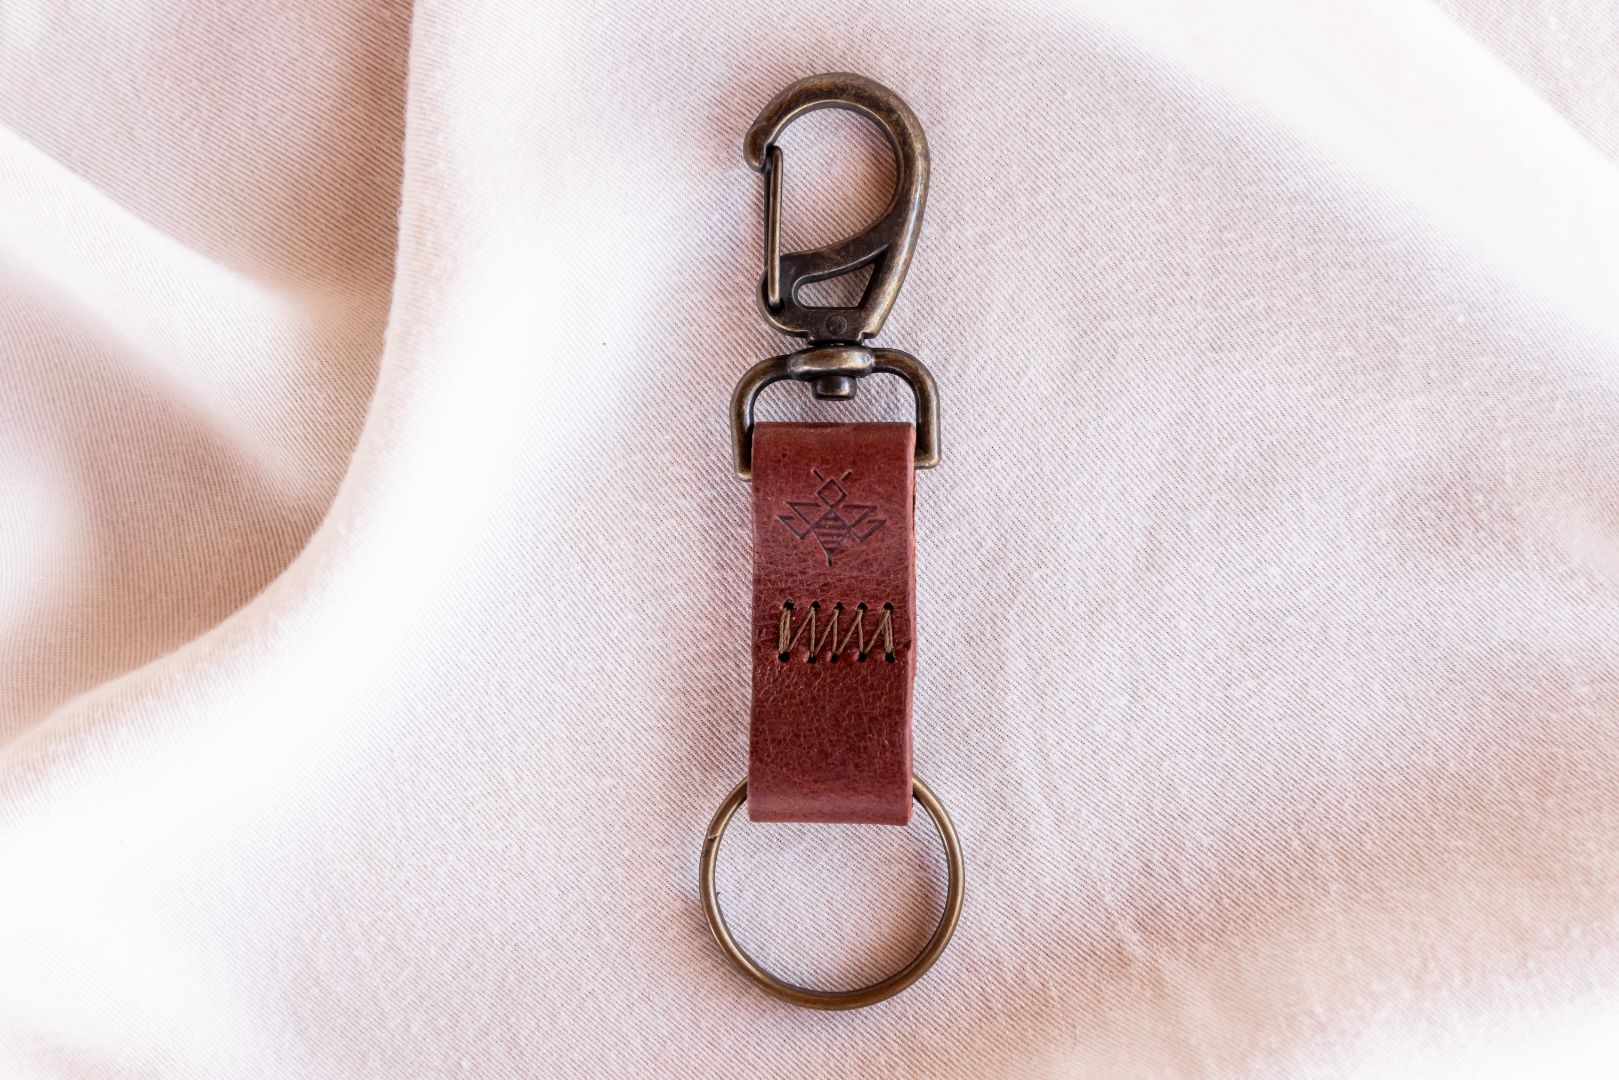 Leather Keychains 10 Packs - Double-Sided Personalization Ready Keychains